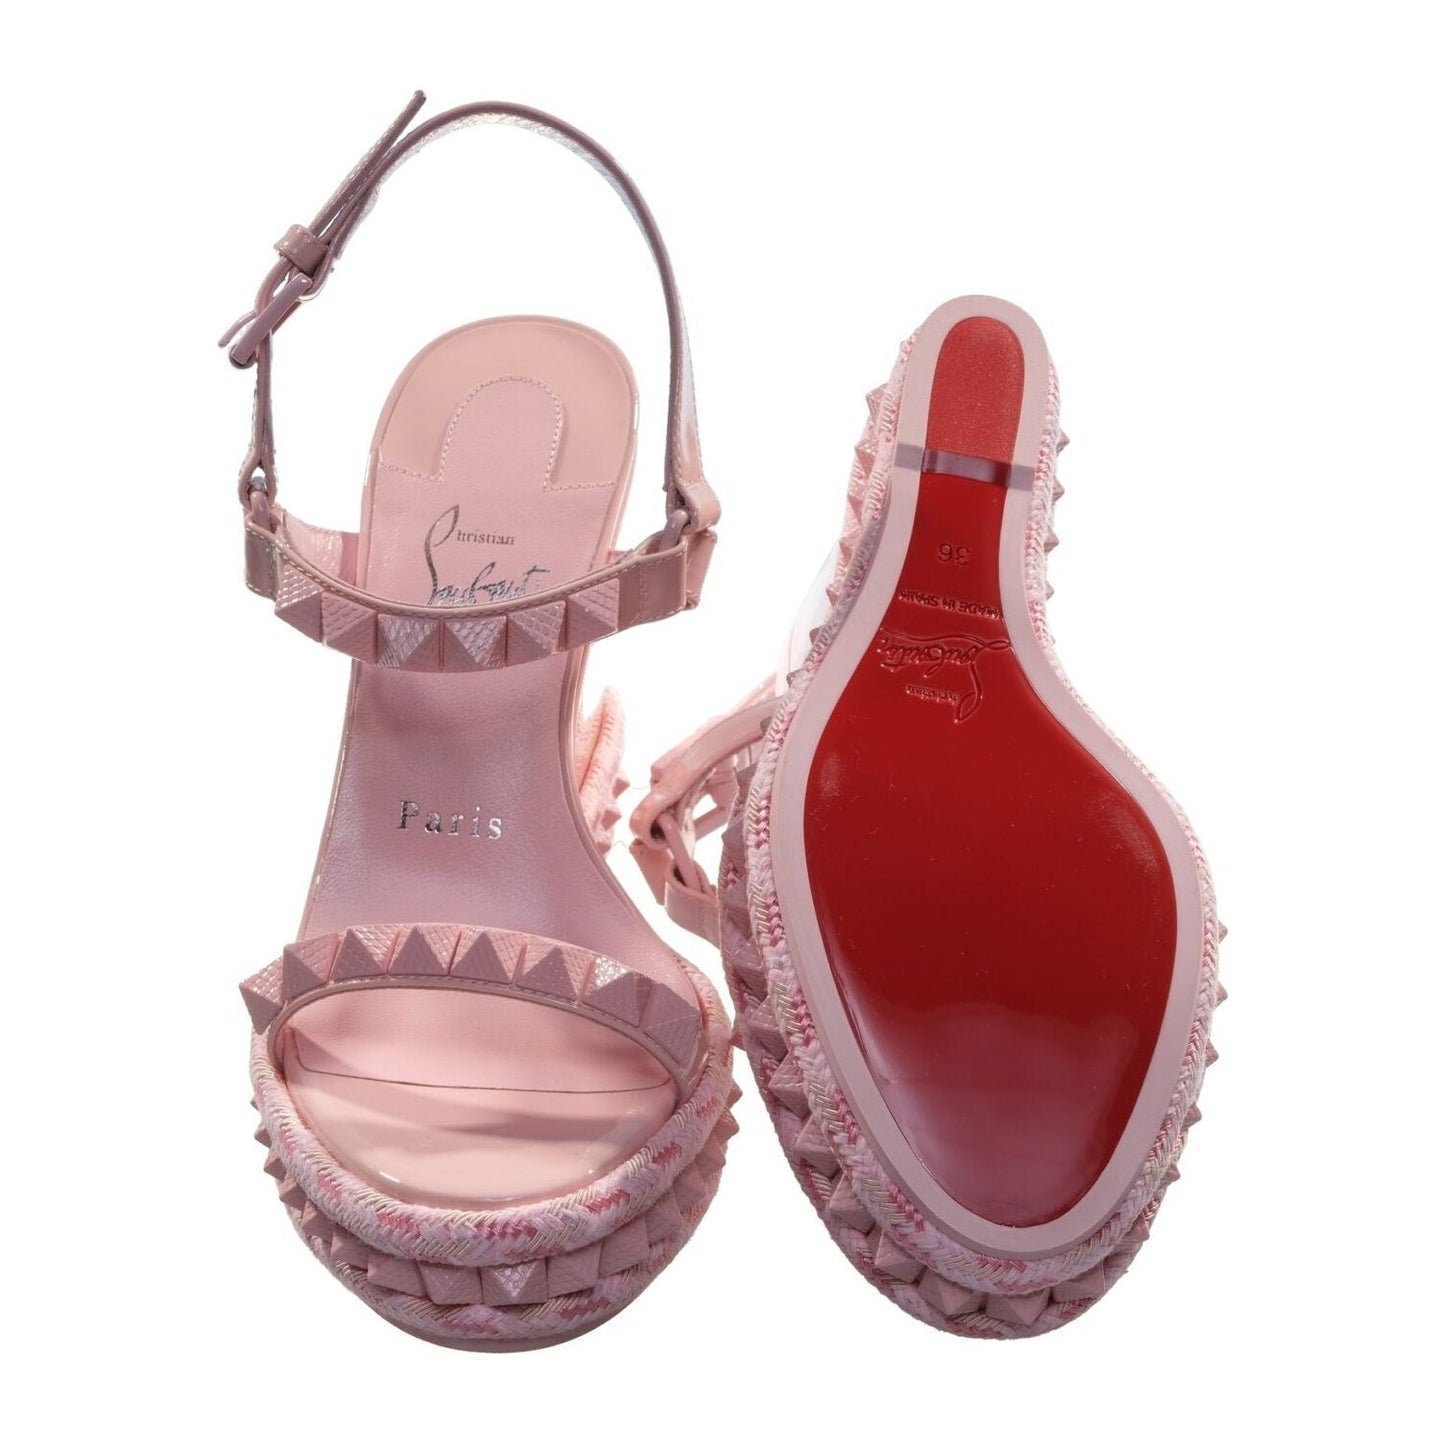 Christian Louboutin Pyraclou 100 Rosy Pink Studded Patent Leather High Heel Wedge Sandals pyraclou-100-rosy-pink-studded-patent-leather-high-heel-wedge-sandals